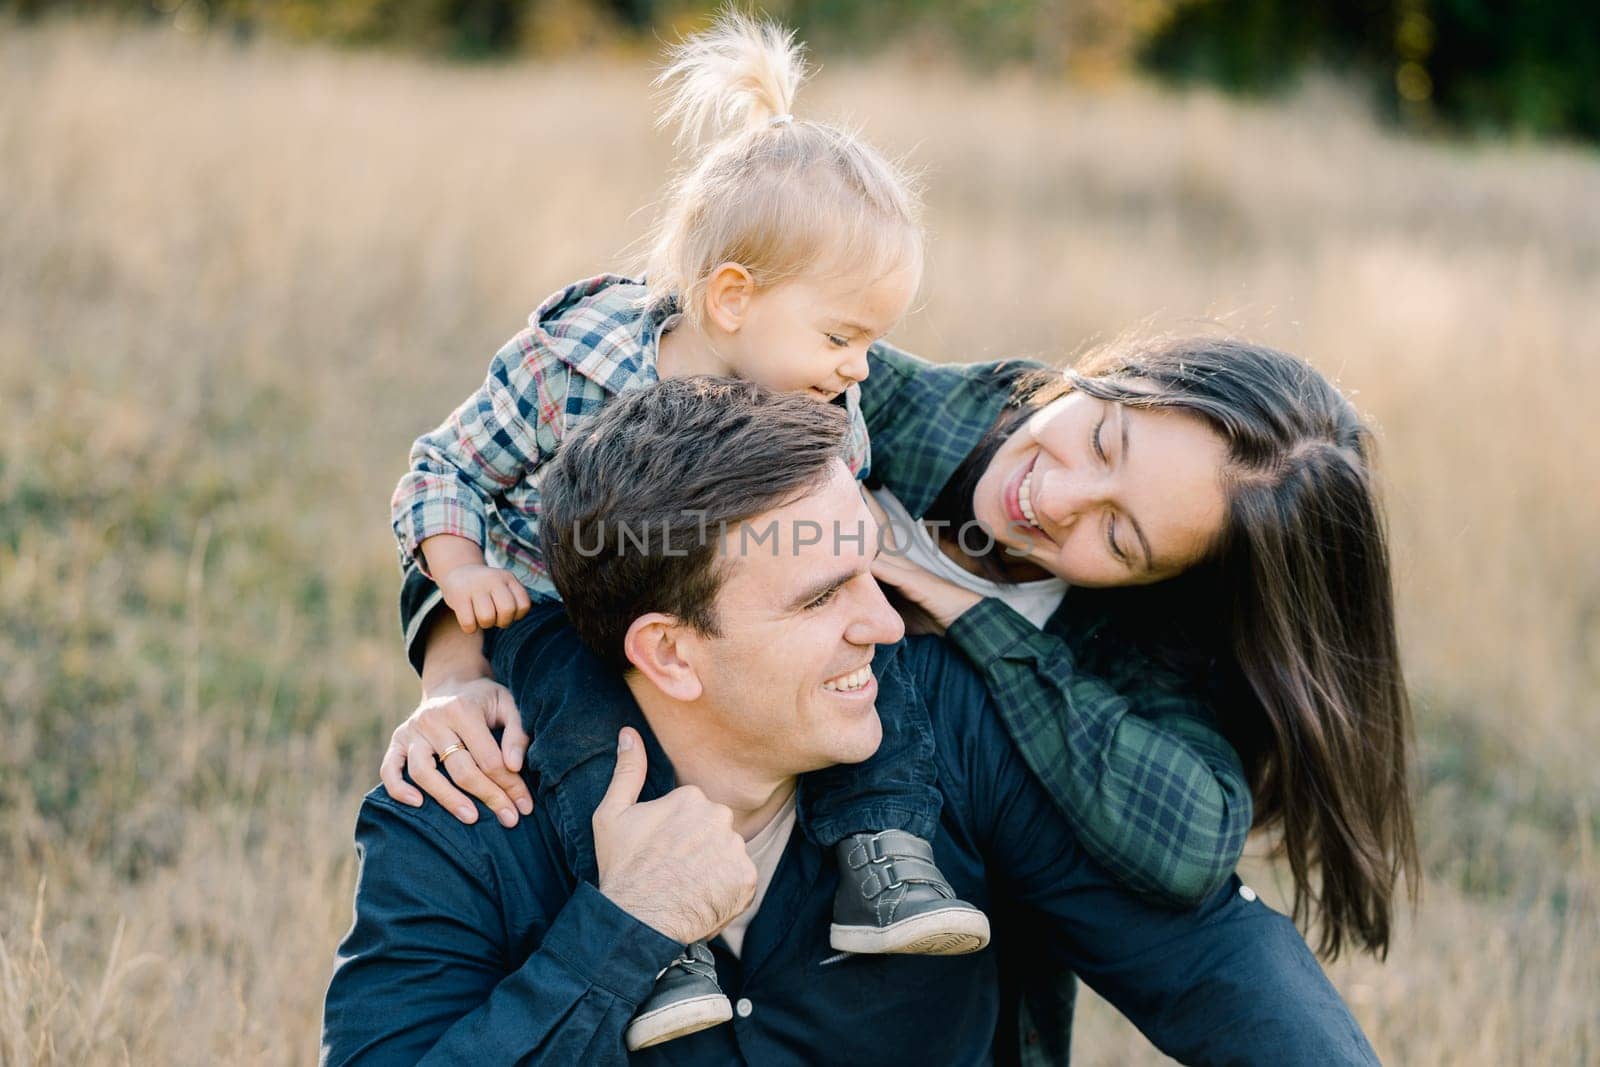 Smiling mom hugging dad with a little girl on his shoulders from behind, looking into his face. High quality photo